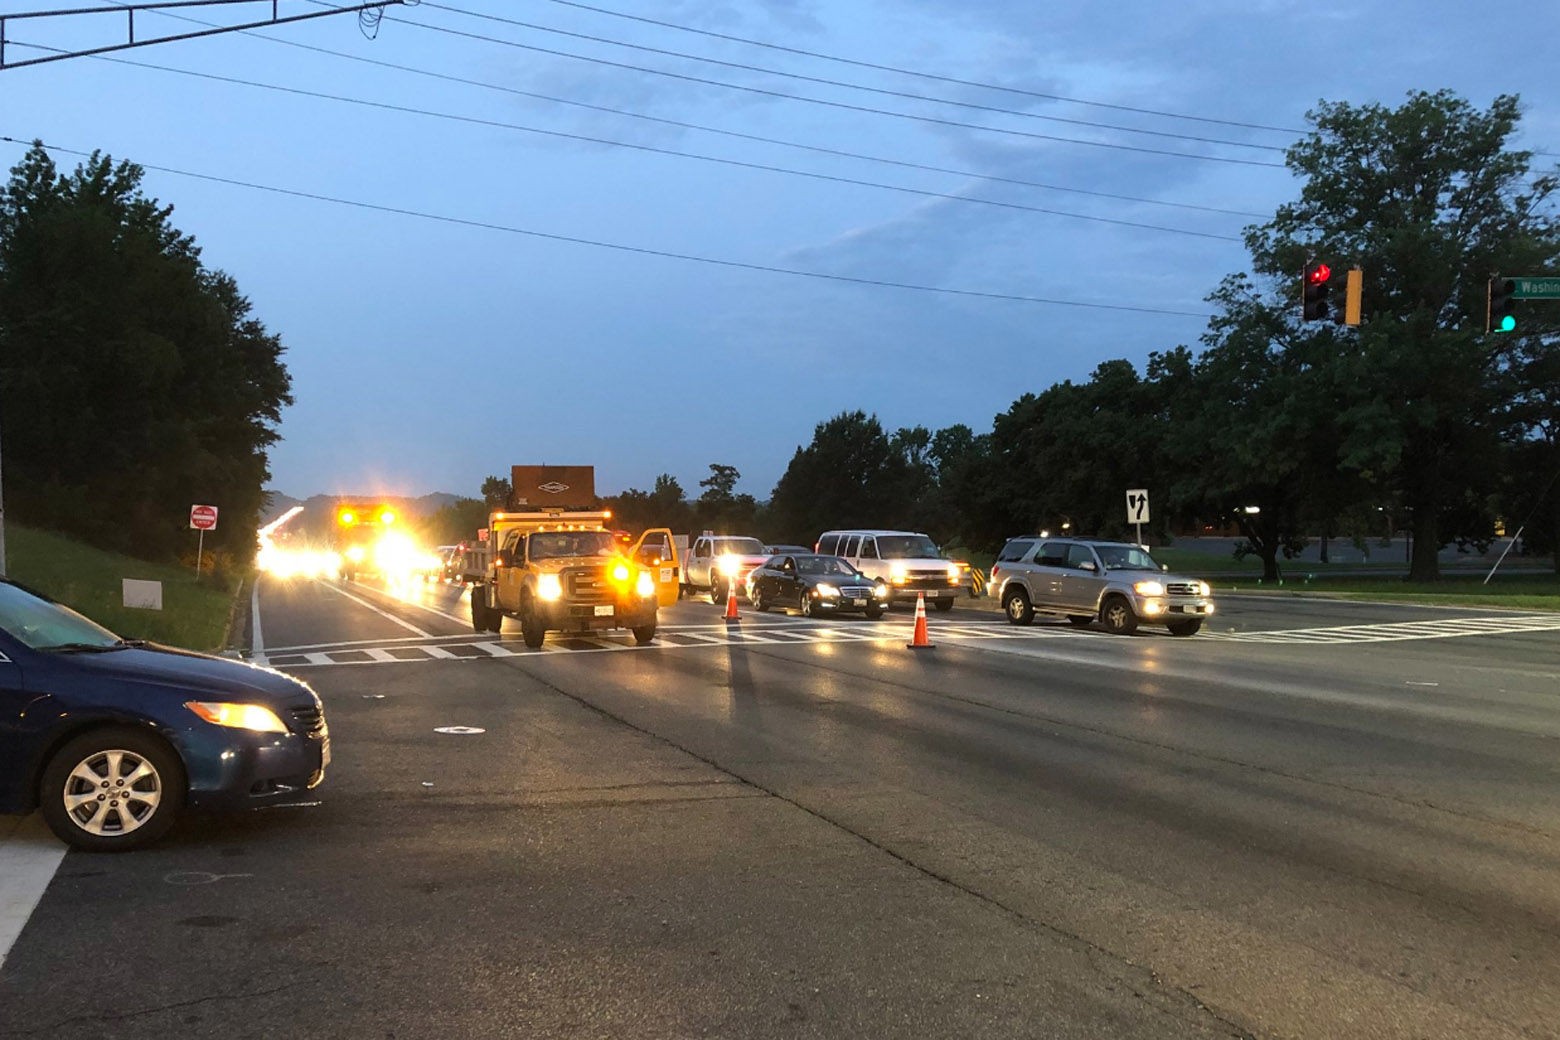 A single-vehicle crash in Prince George's County, Maryland, Thursday morning sent two children flying from an SUV, the police said. (WTOP/Nick Iannelli)